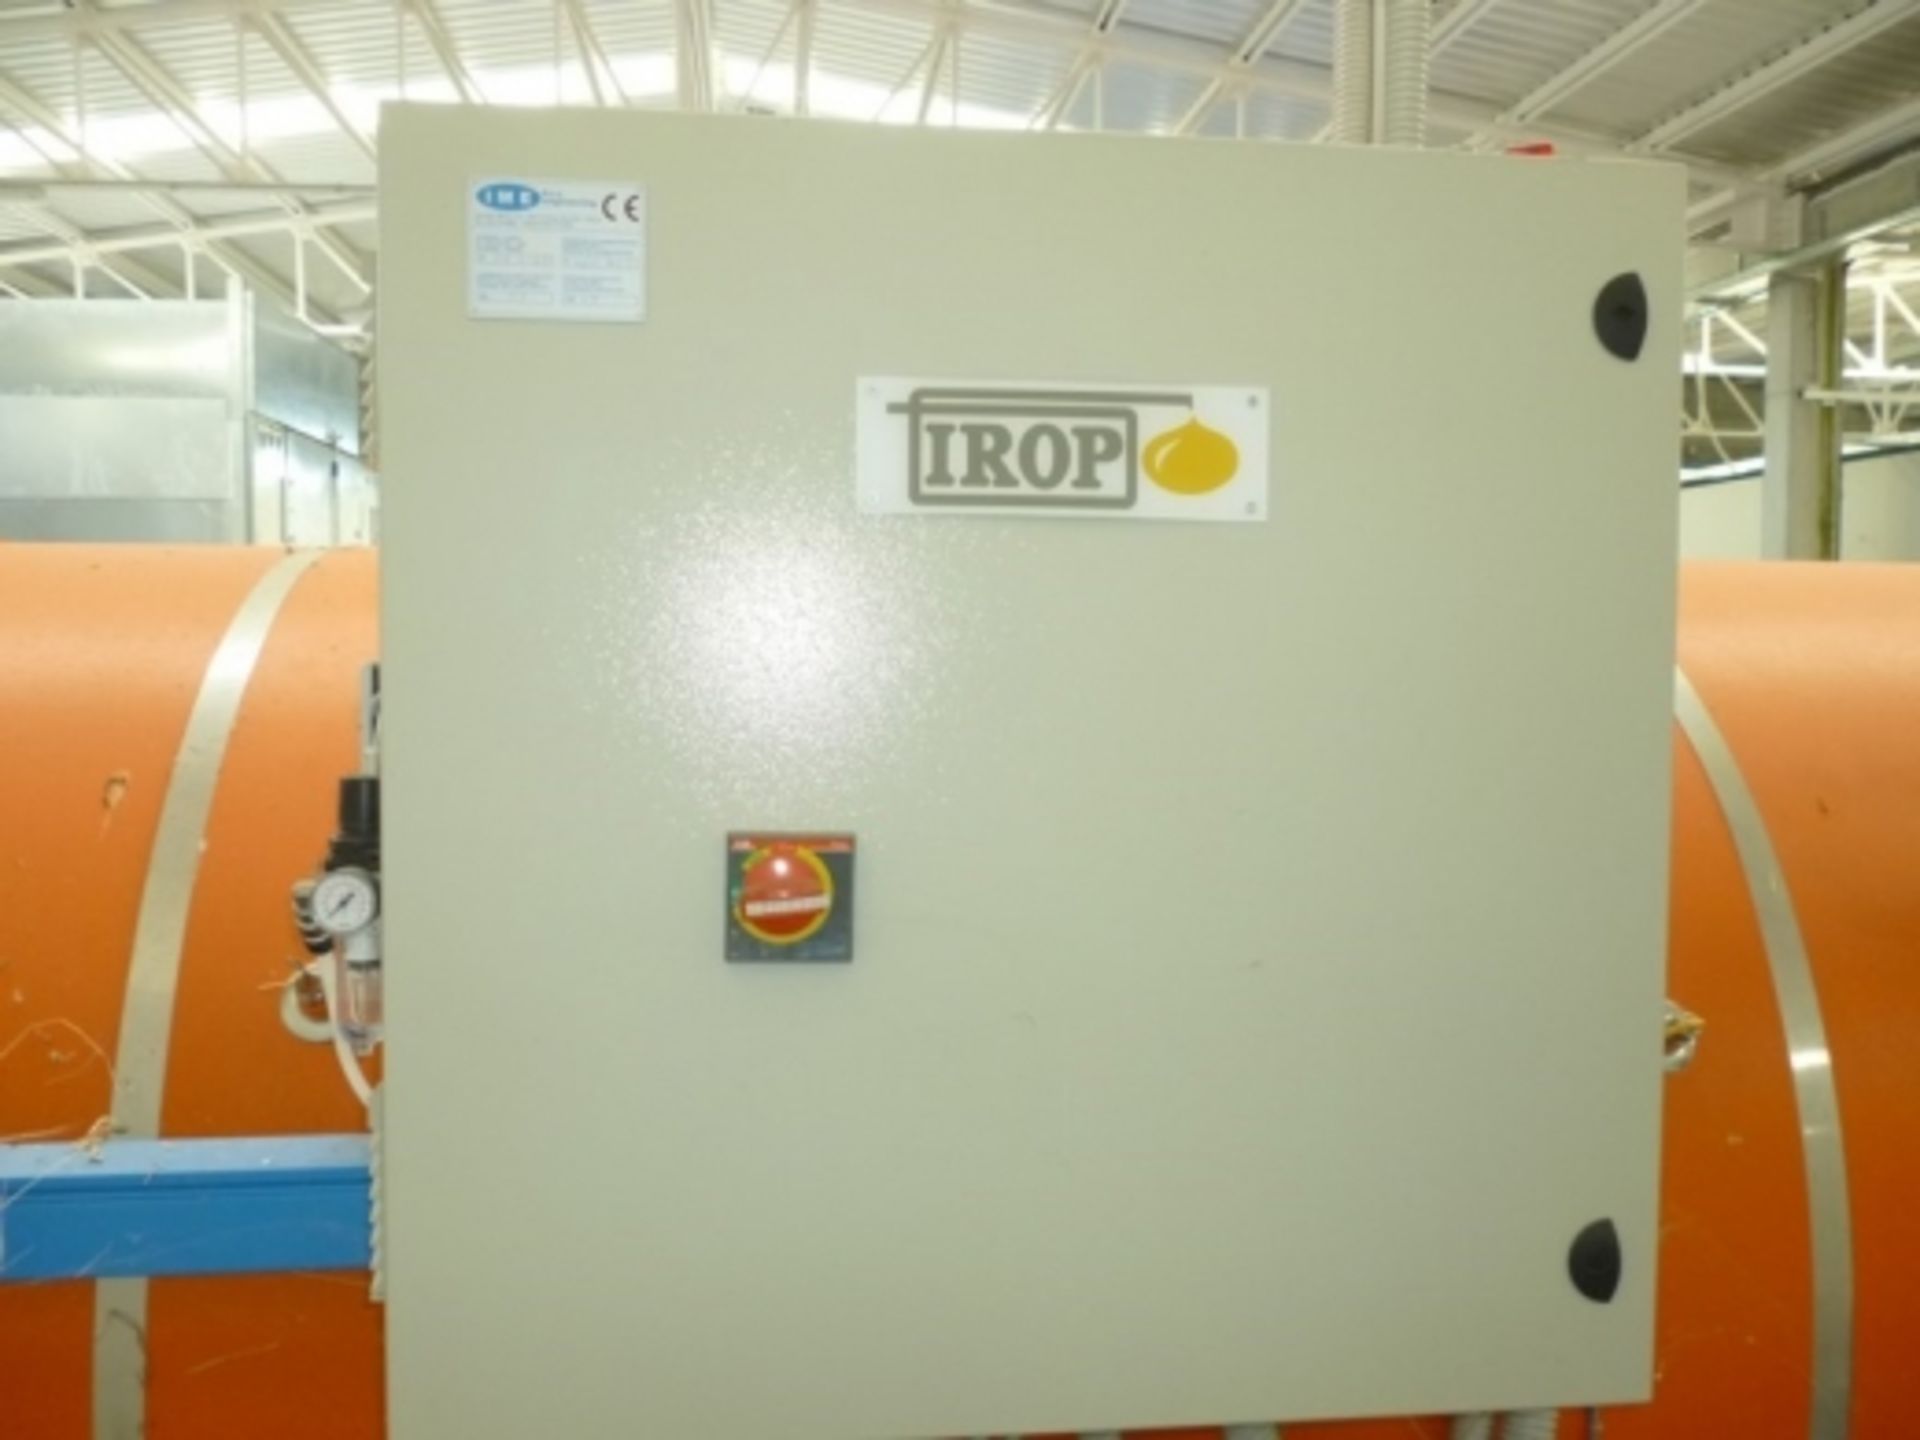 1#775 Irop autoclave for composite material polymerisation - Image 4 of 4